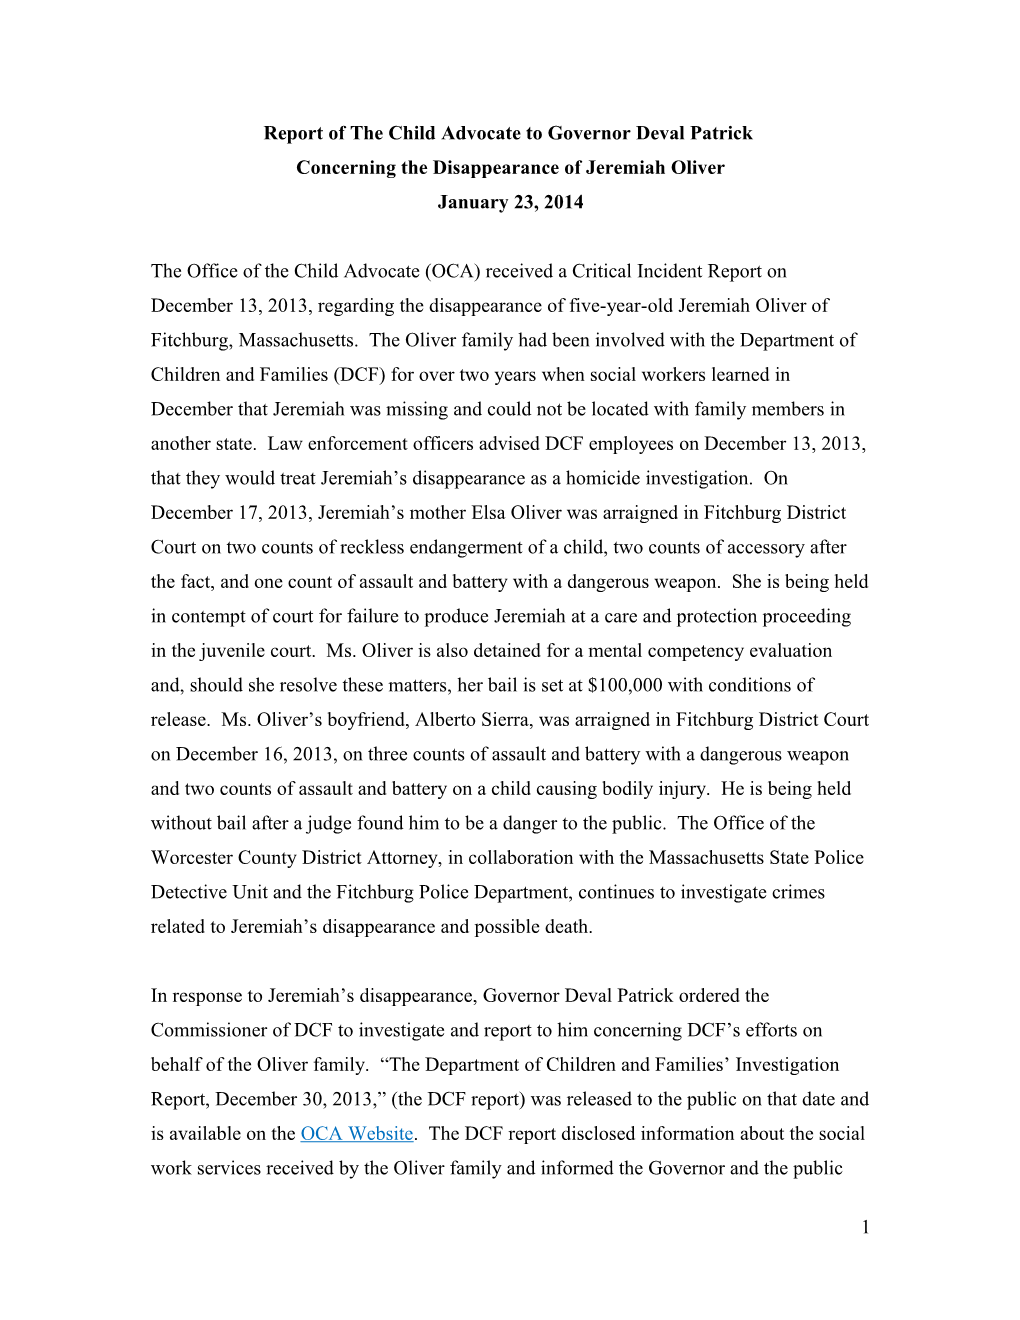 Report of the Child Advocate to Governor Deval Patrick